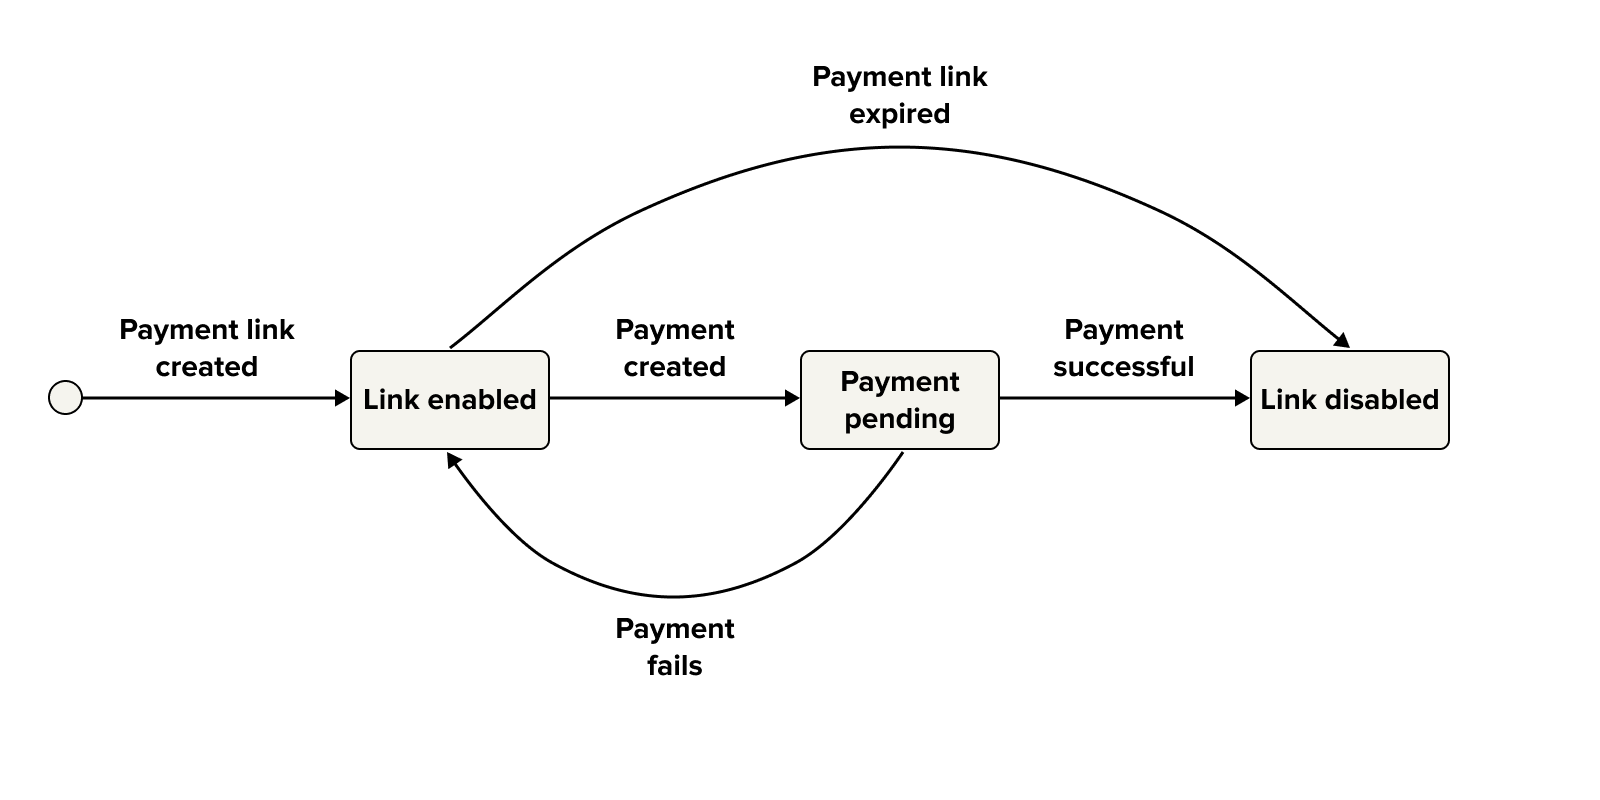 A flow diagram explaining the lifecycle of a payment link.